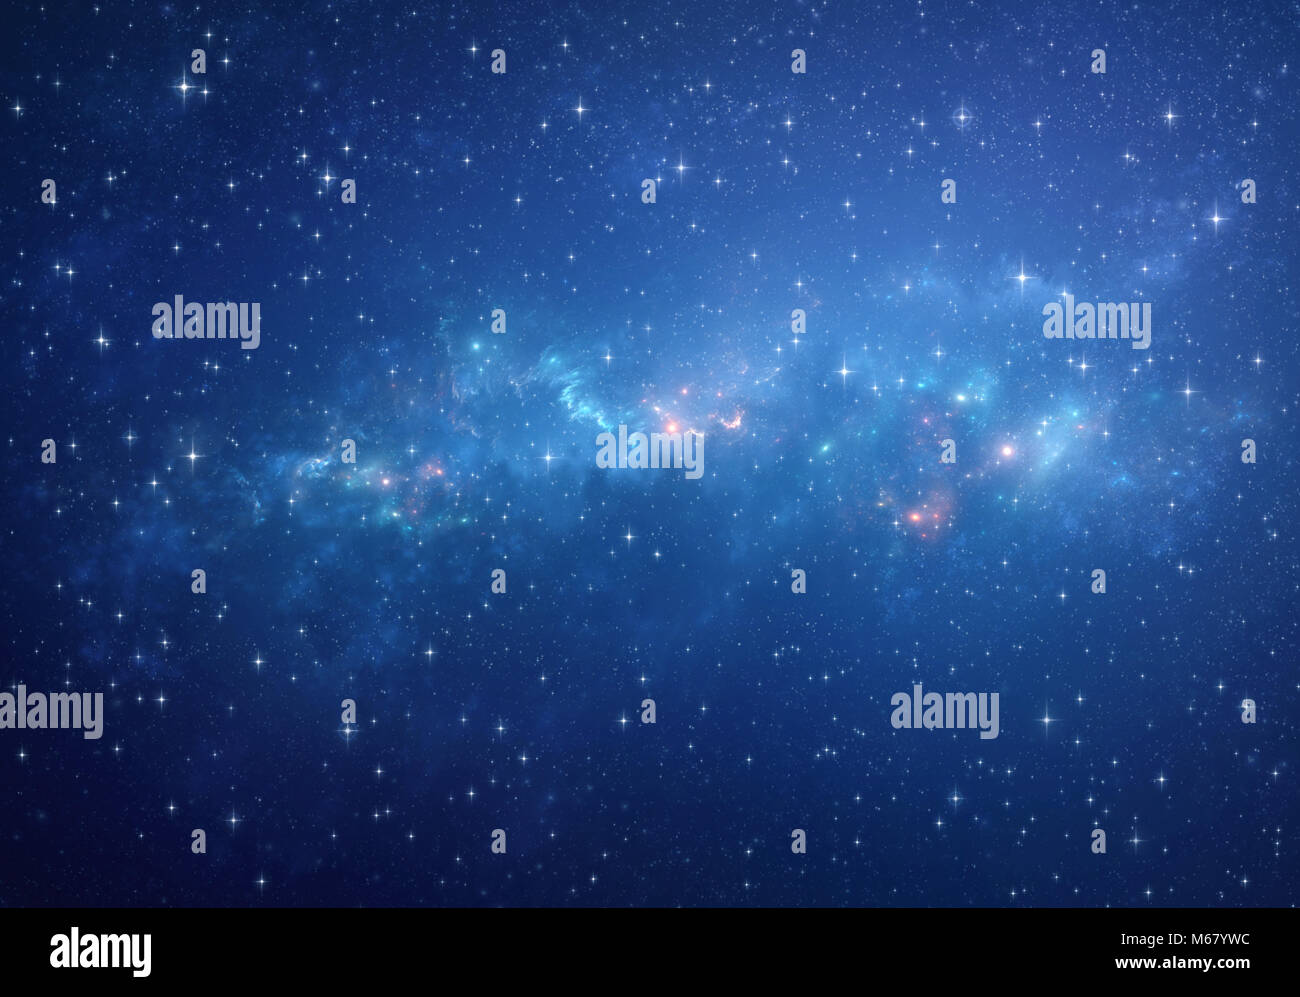 Deep space full of star clusters and galaxies. Infinite universe in high resolution. Stock Photo